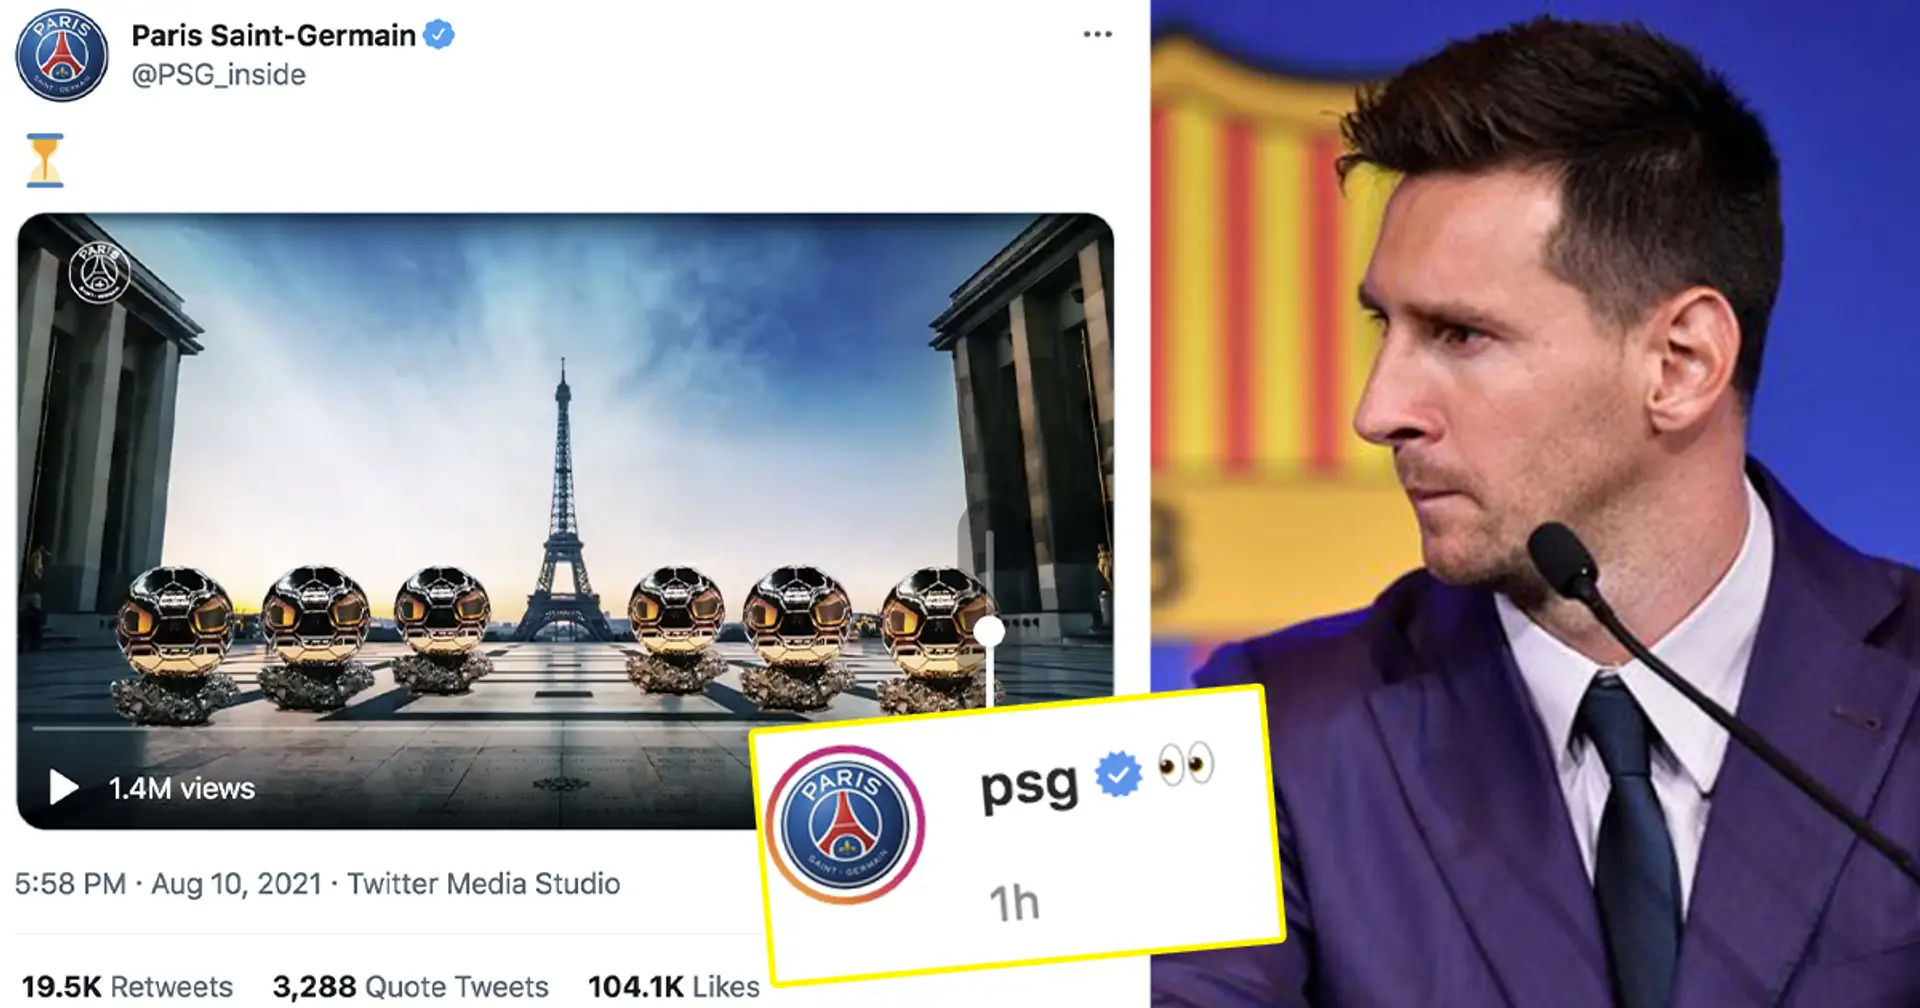 Counted: How many new Twitter and Instagram followers PSG gained since Messi announcement